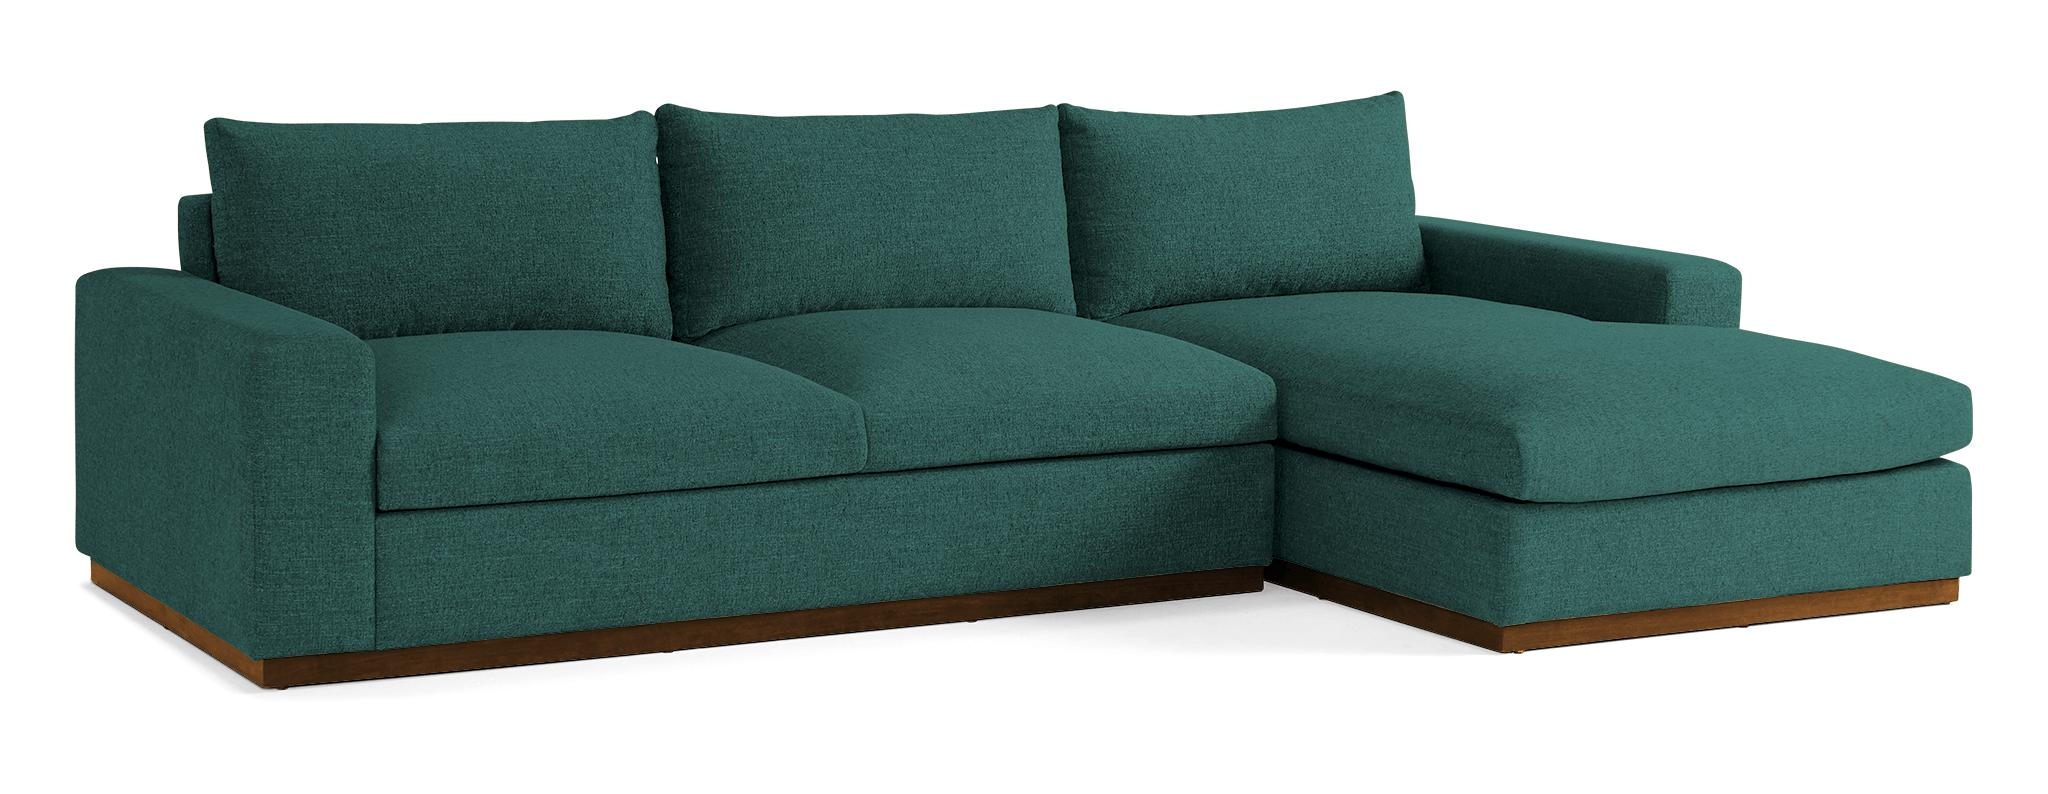 Blue Holt Mid Century Modern Sectional with Storage - Prime Peacock - Mocha - Left - Image 1